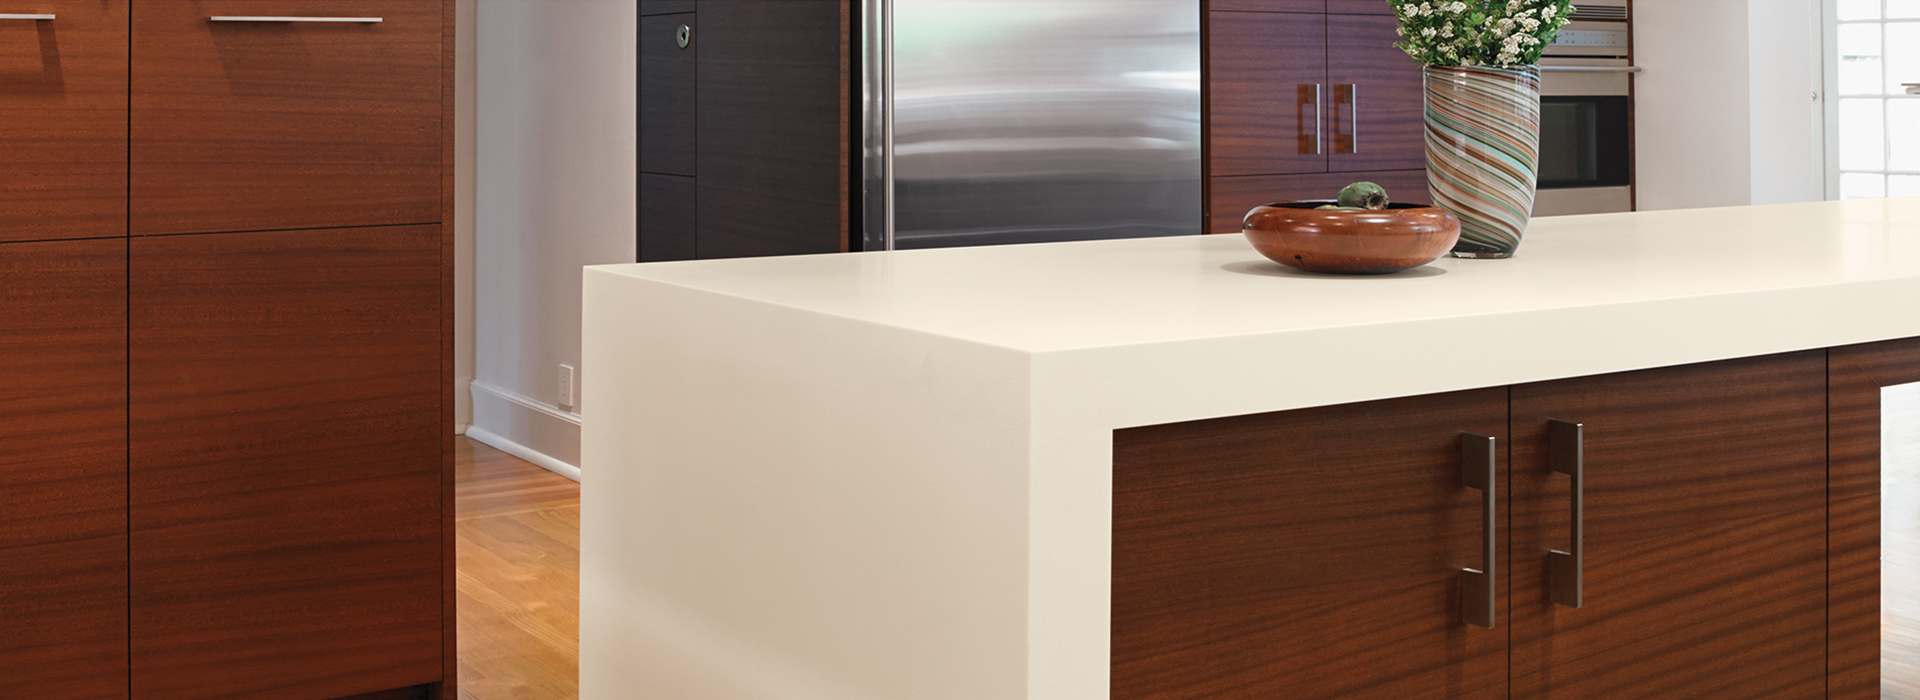 white Formica Counter: image from